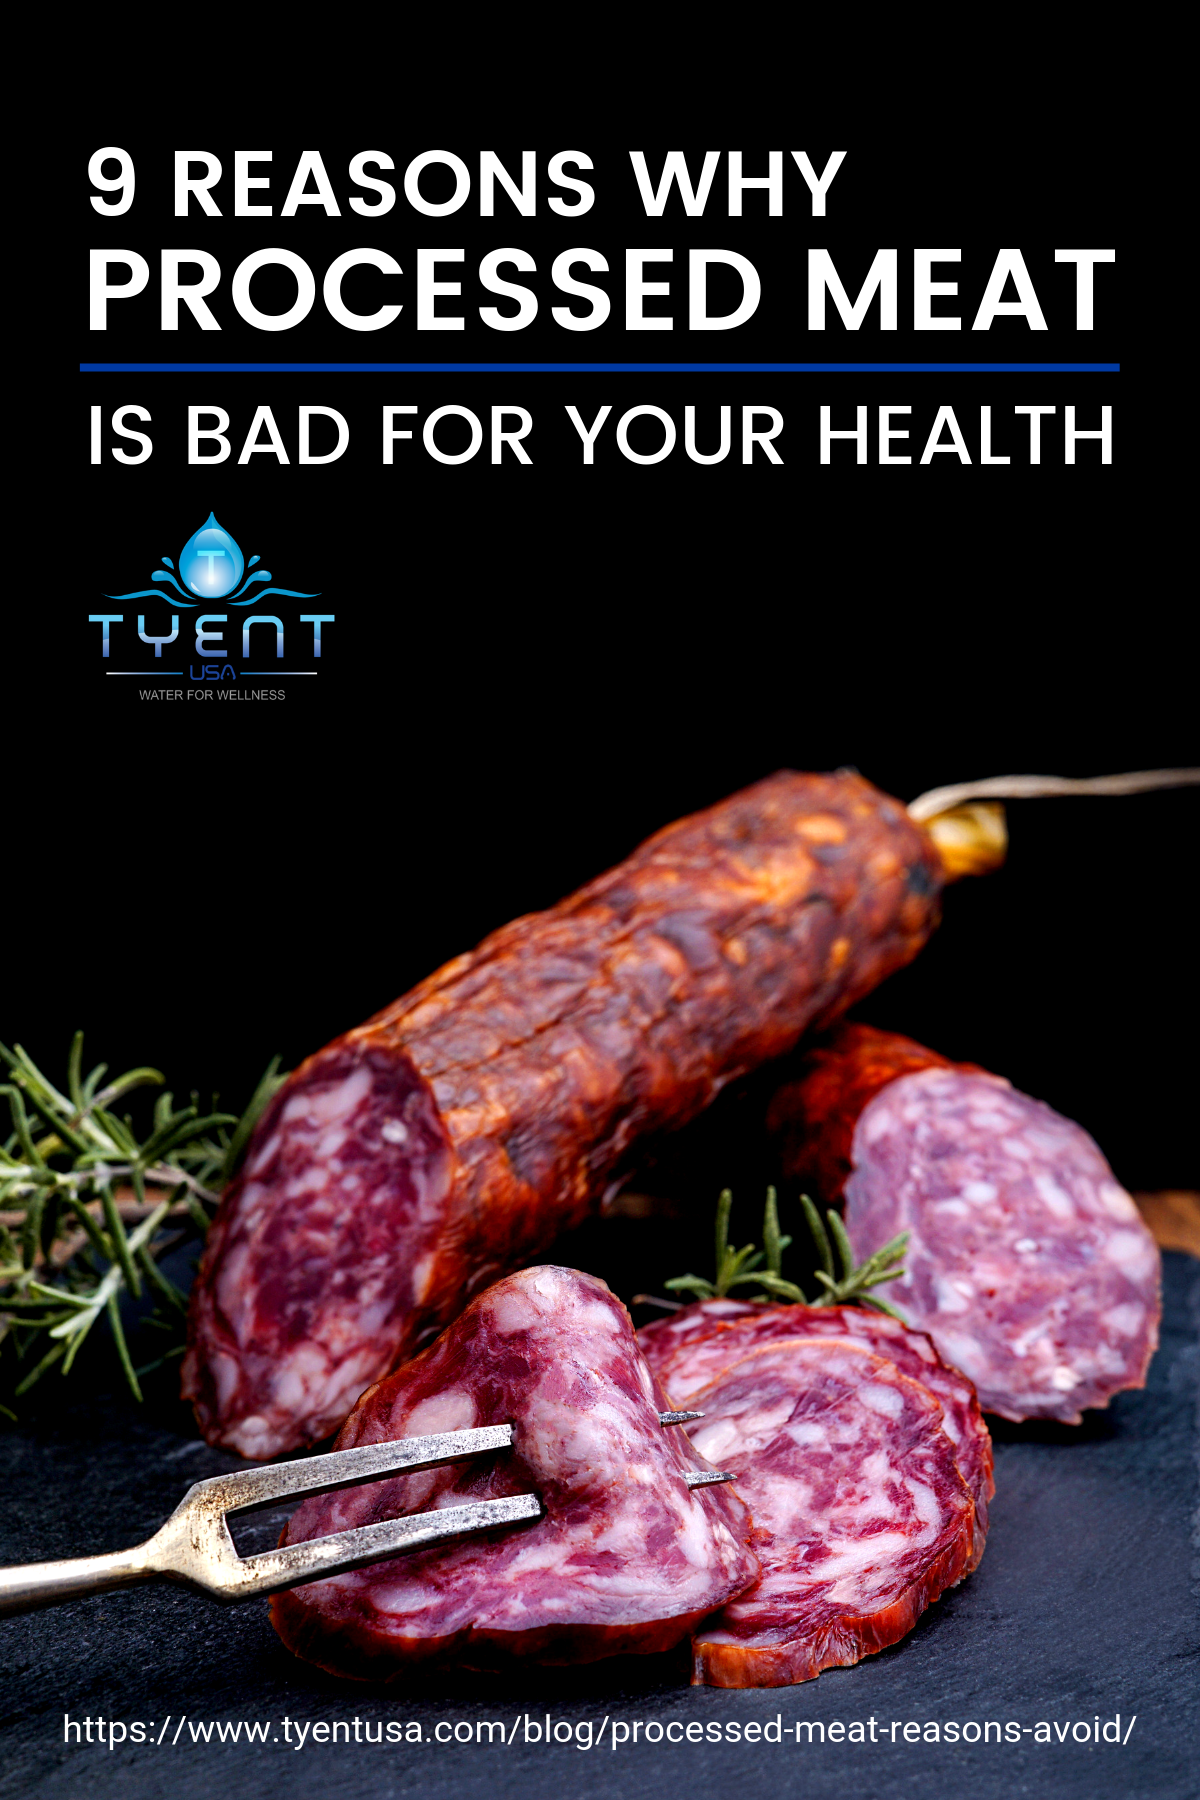 9 Reasons Why Processed Meat Is Bad For Your Health https://www.tyentusa.com/blog/processed-meat-reasons-avoid/